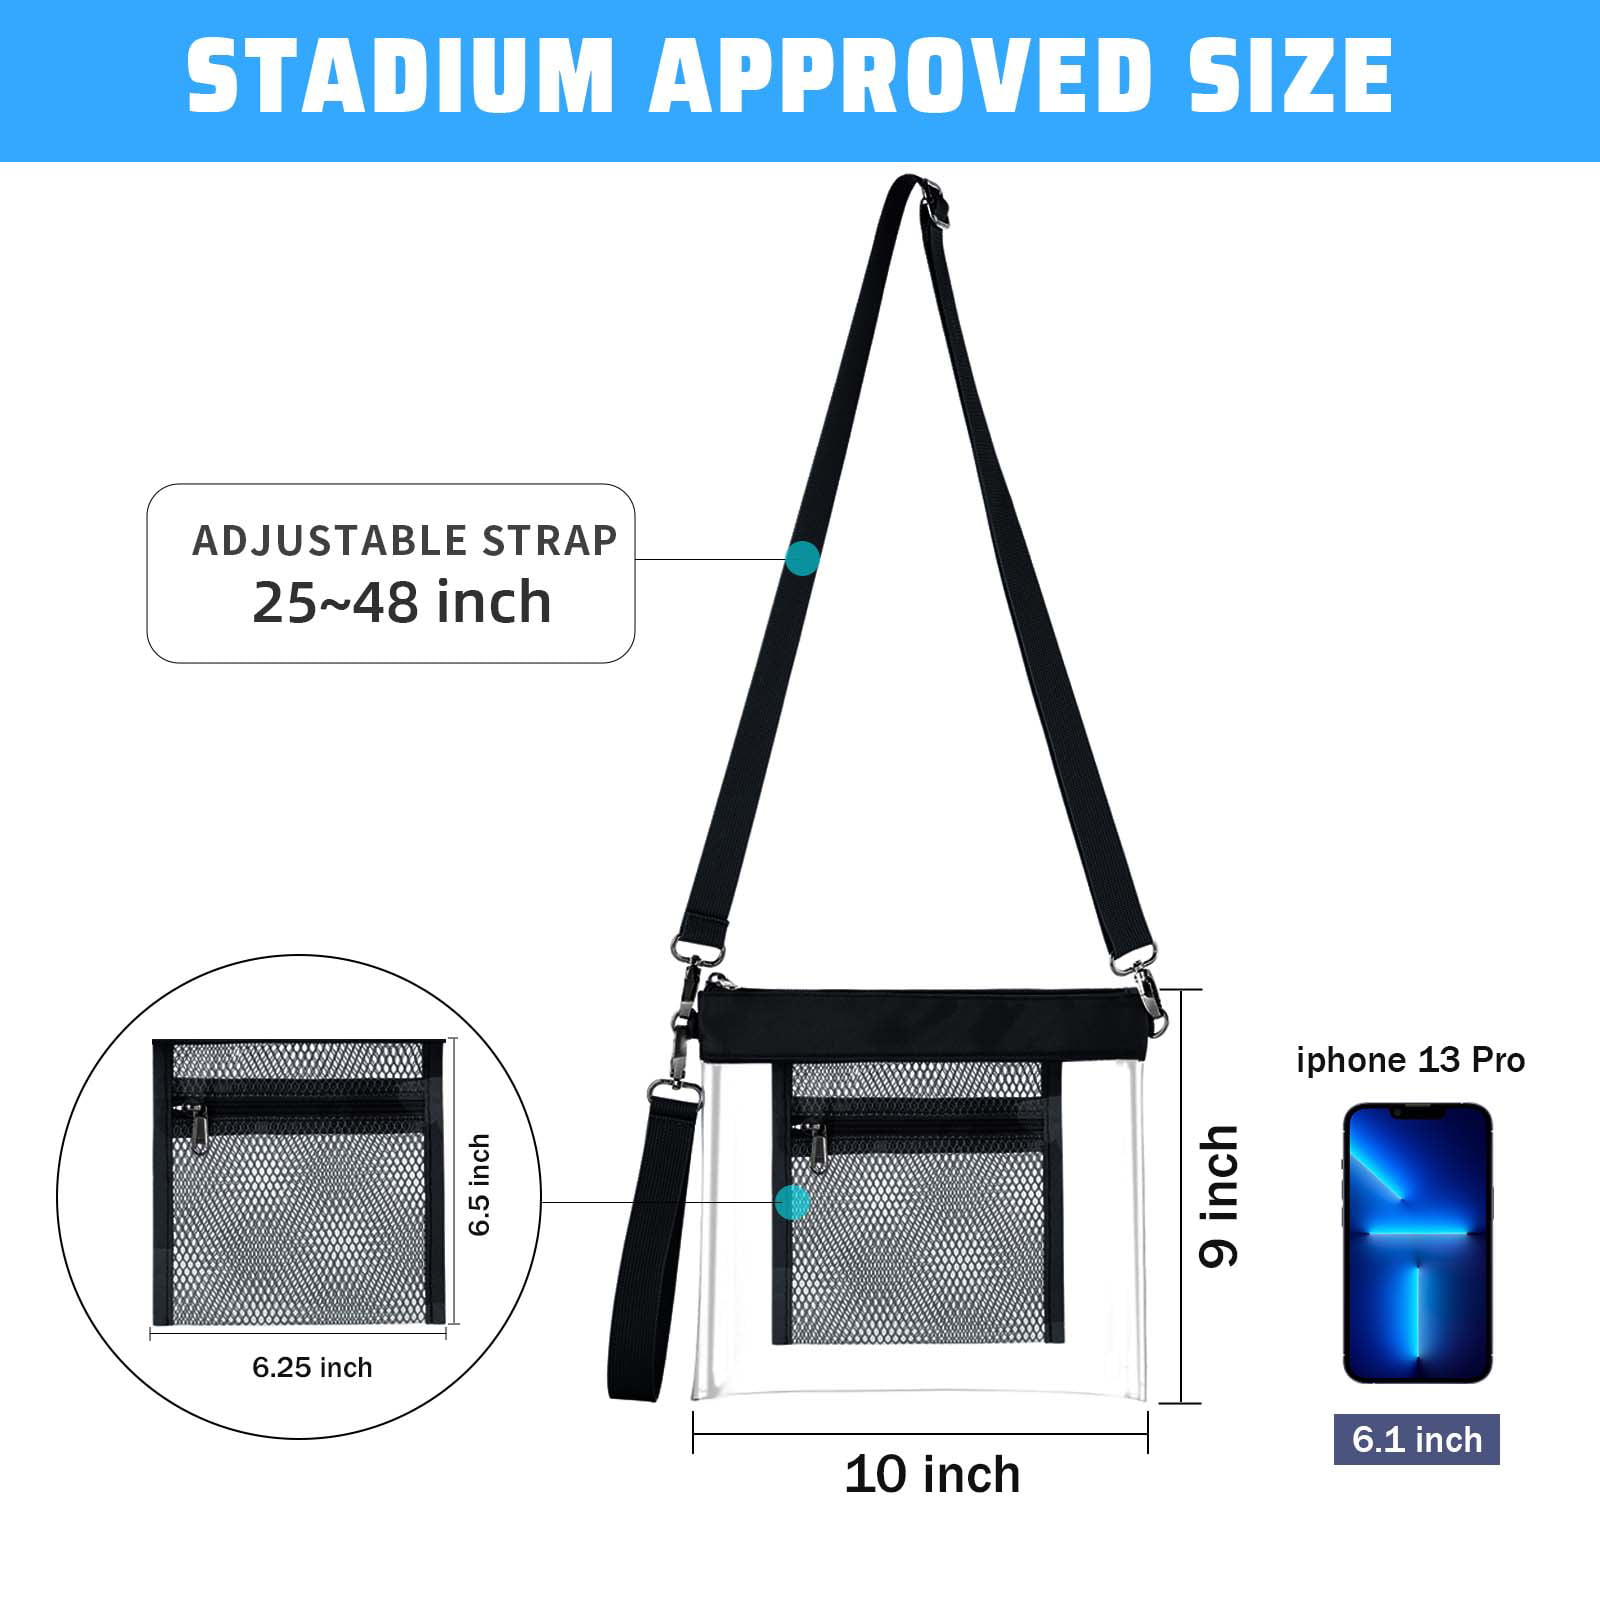 Vorspack Clear Bag Stadium Approved - PU Leather Clear Purse Clear Crossbody Bag for Concert Festival